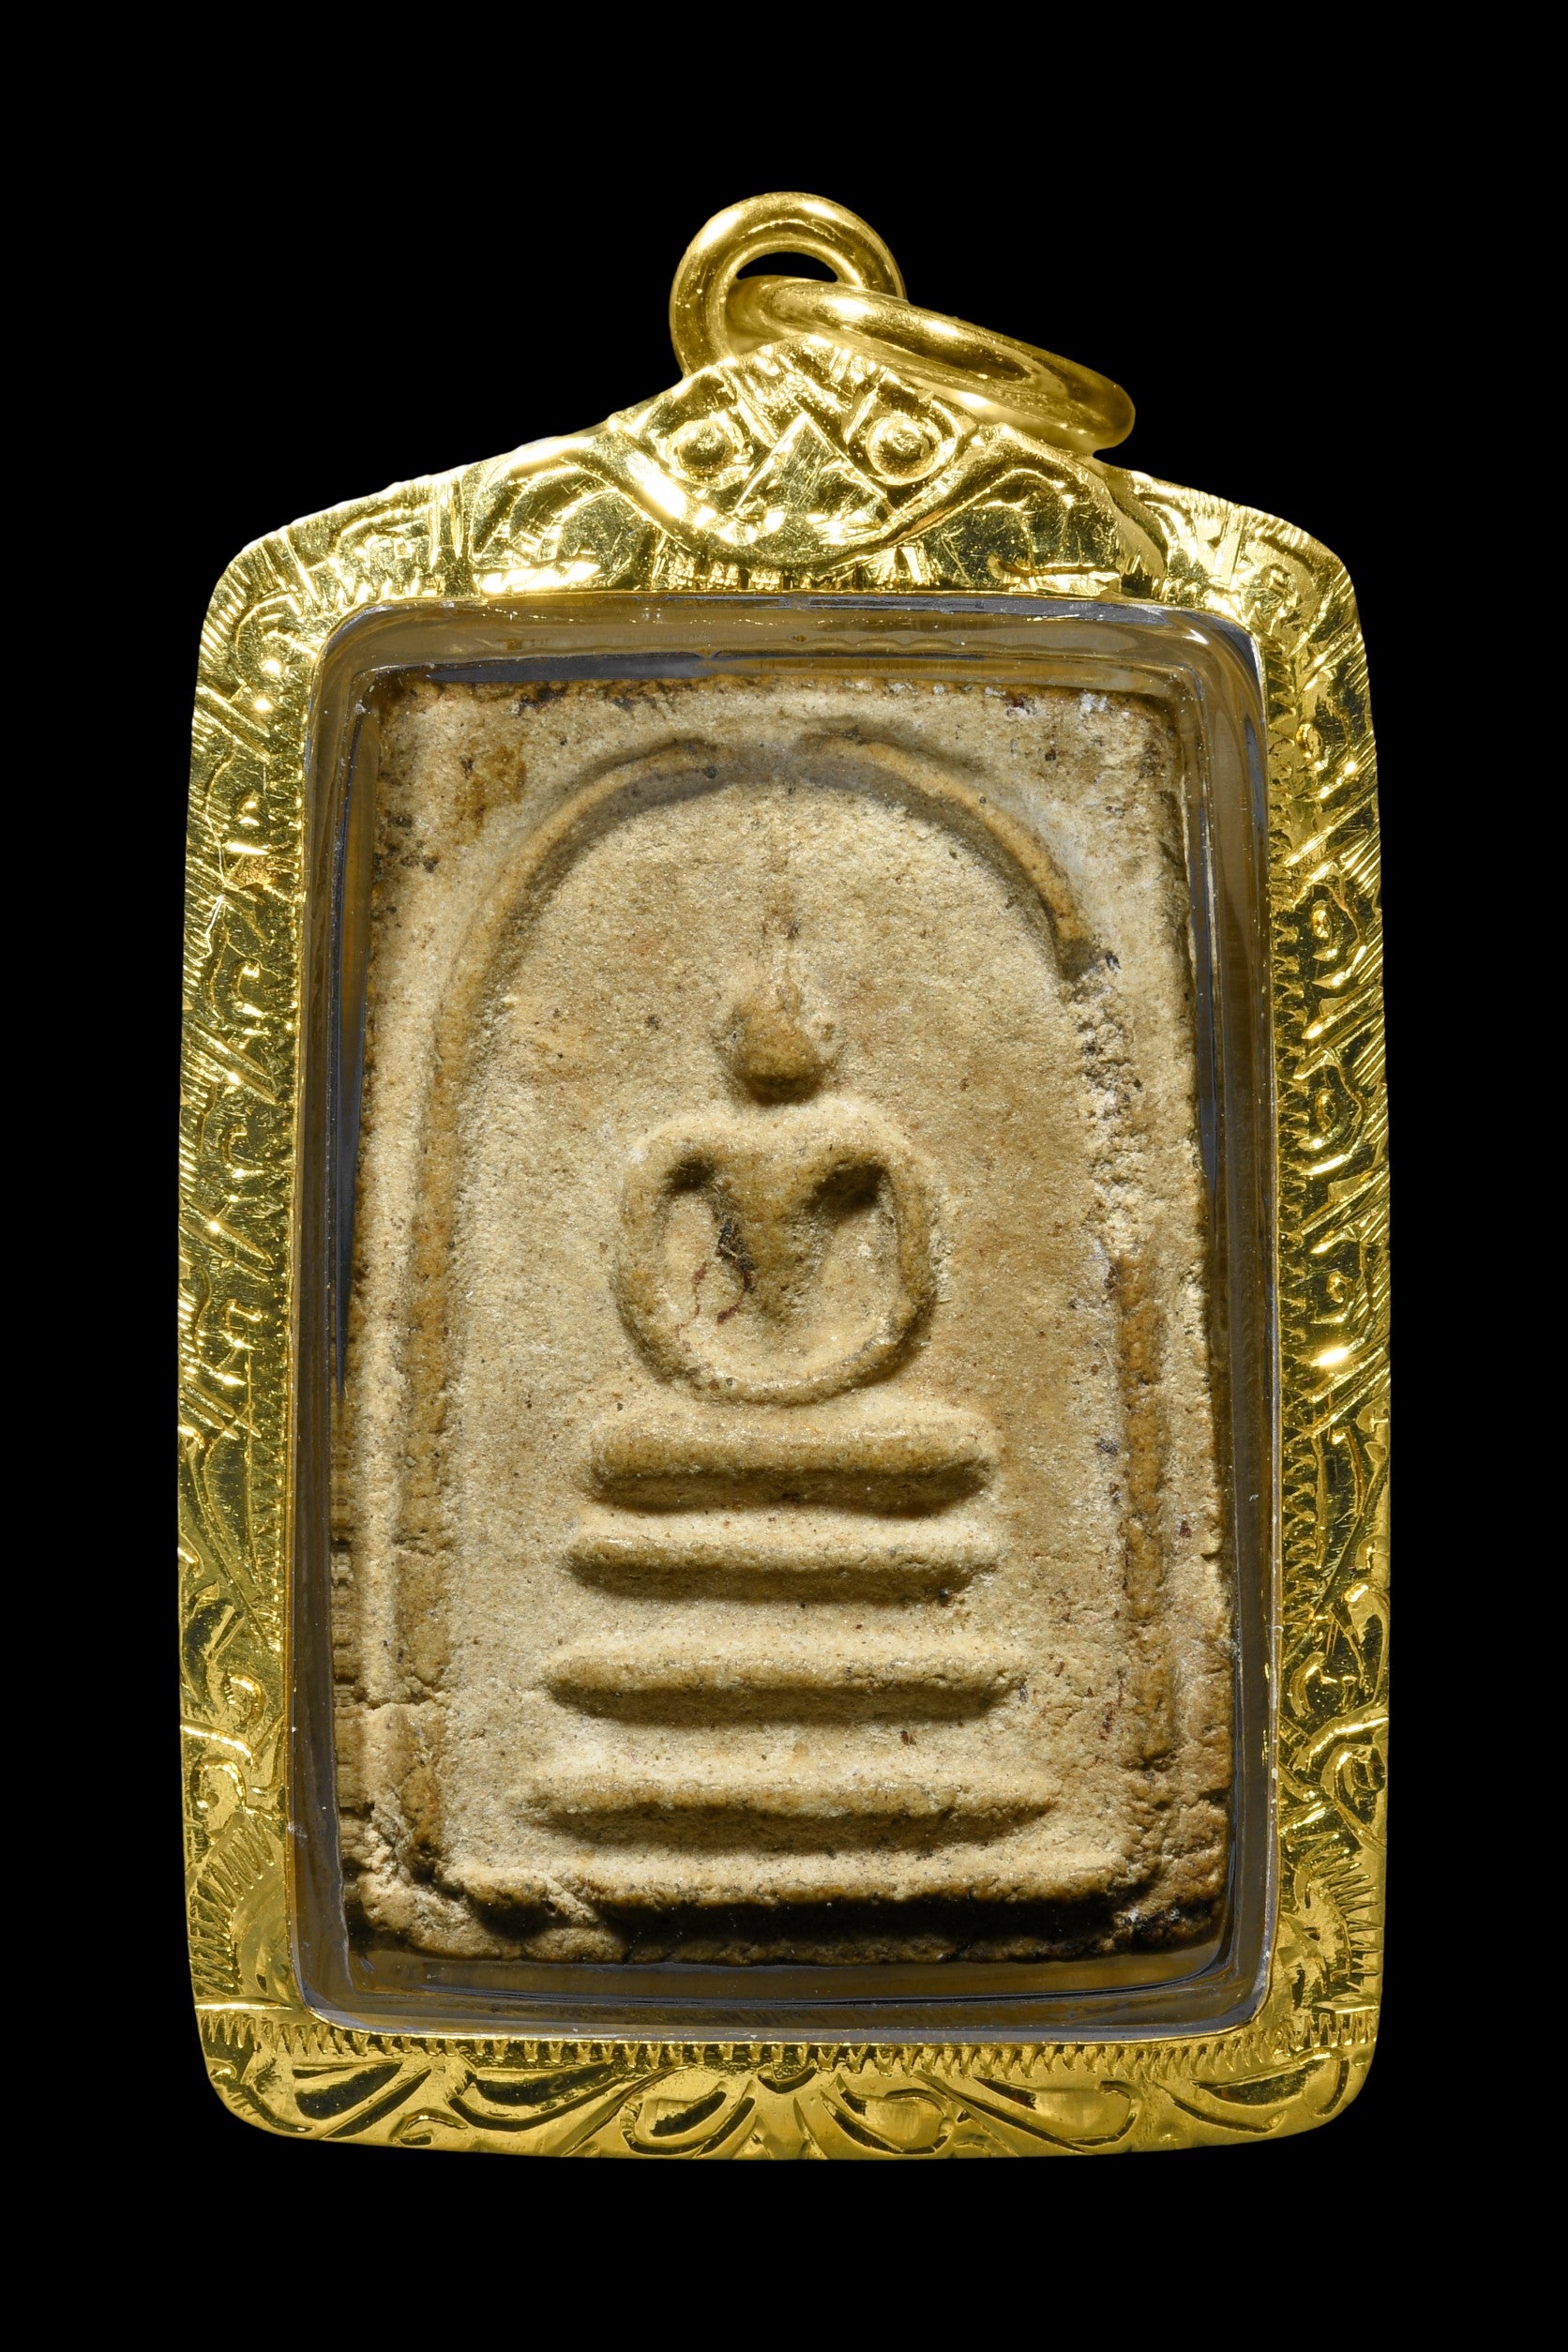 Discover the power of the smallest amulet from the famous LP Mui of Wat Don Rai. With the sacred Phra Somdej Kanean Tarkut San Kasat, experience blessings and protection like never before!